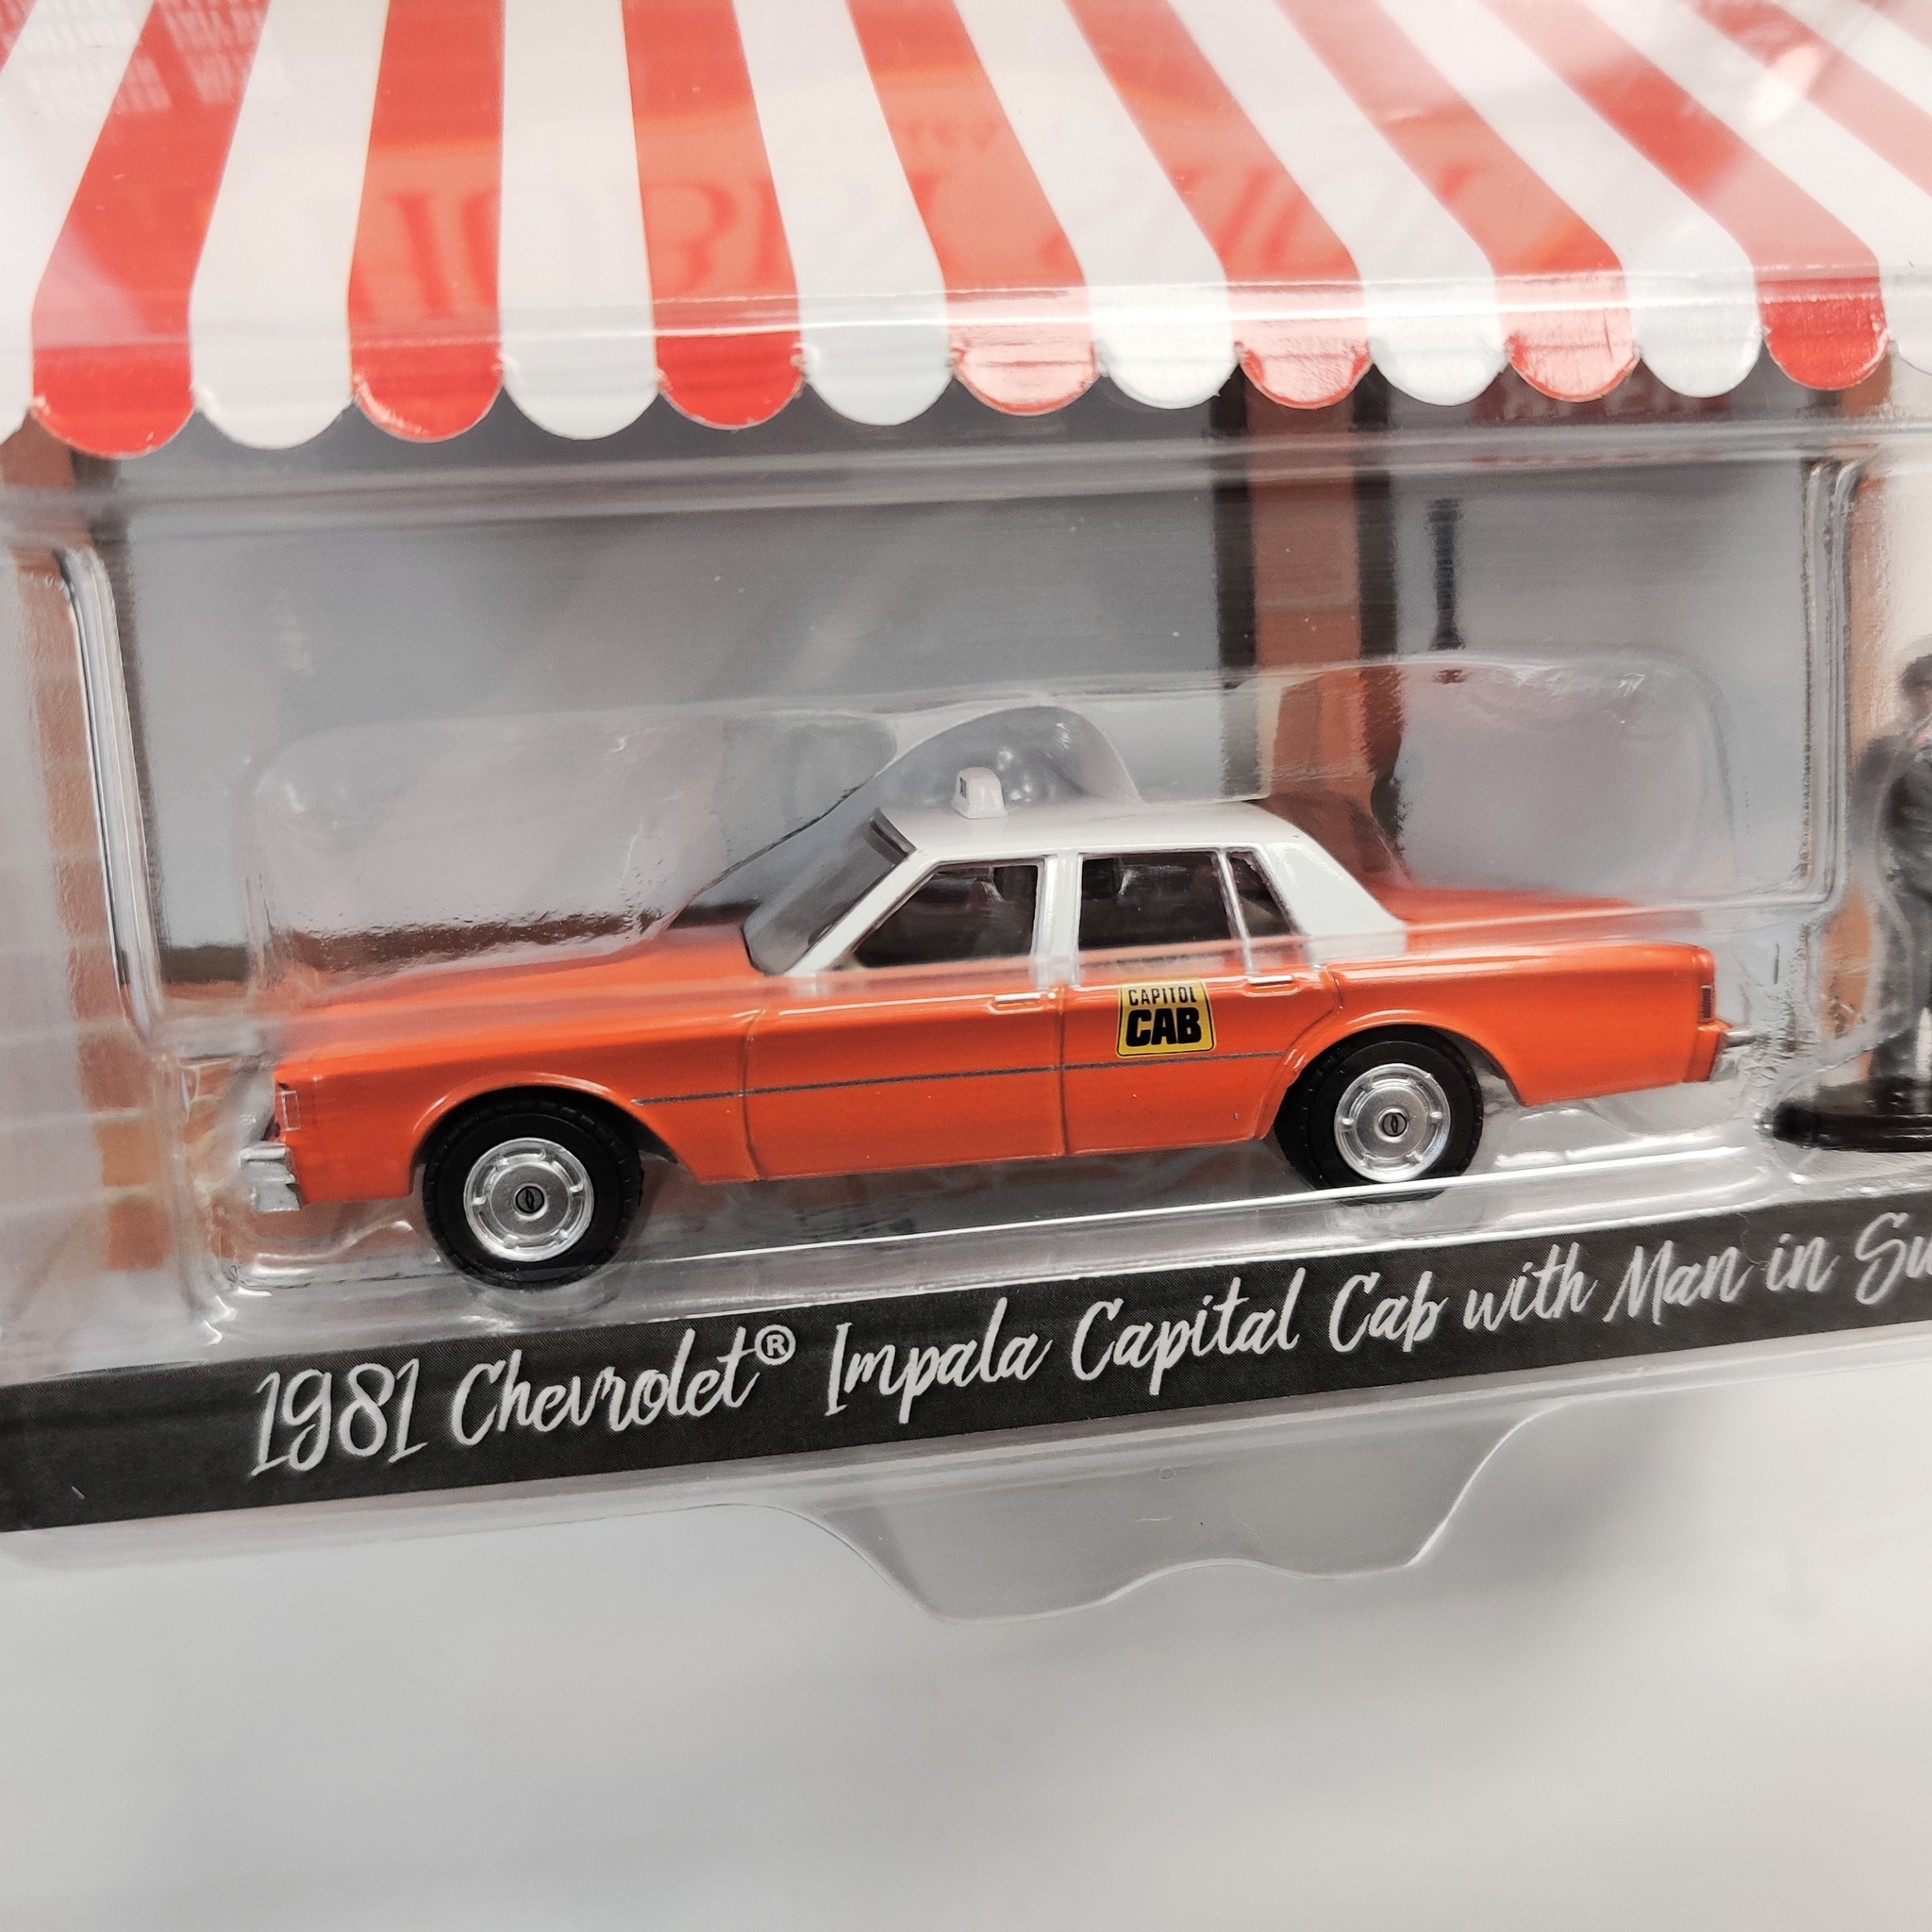 Skala 1/64 Greenlight "The Hobby Shop" 1981 Chevrolet Capital Cab w man in suit